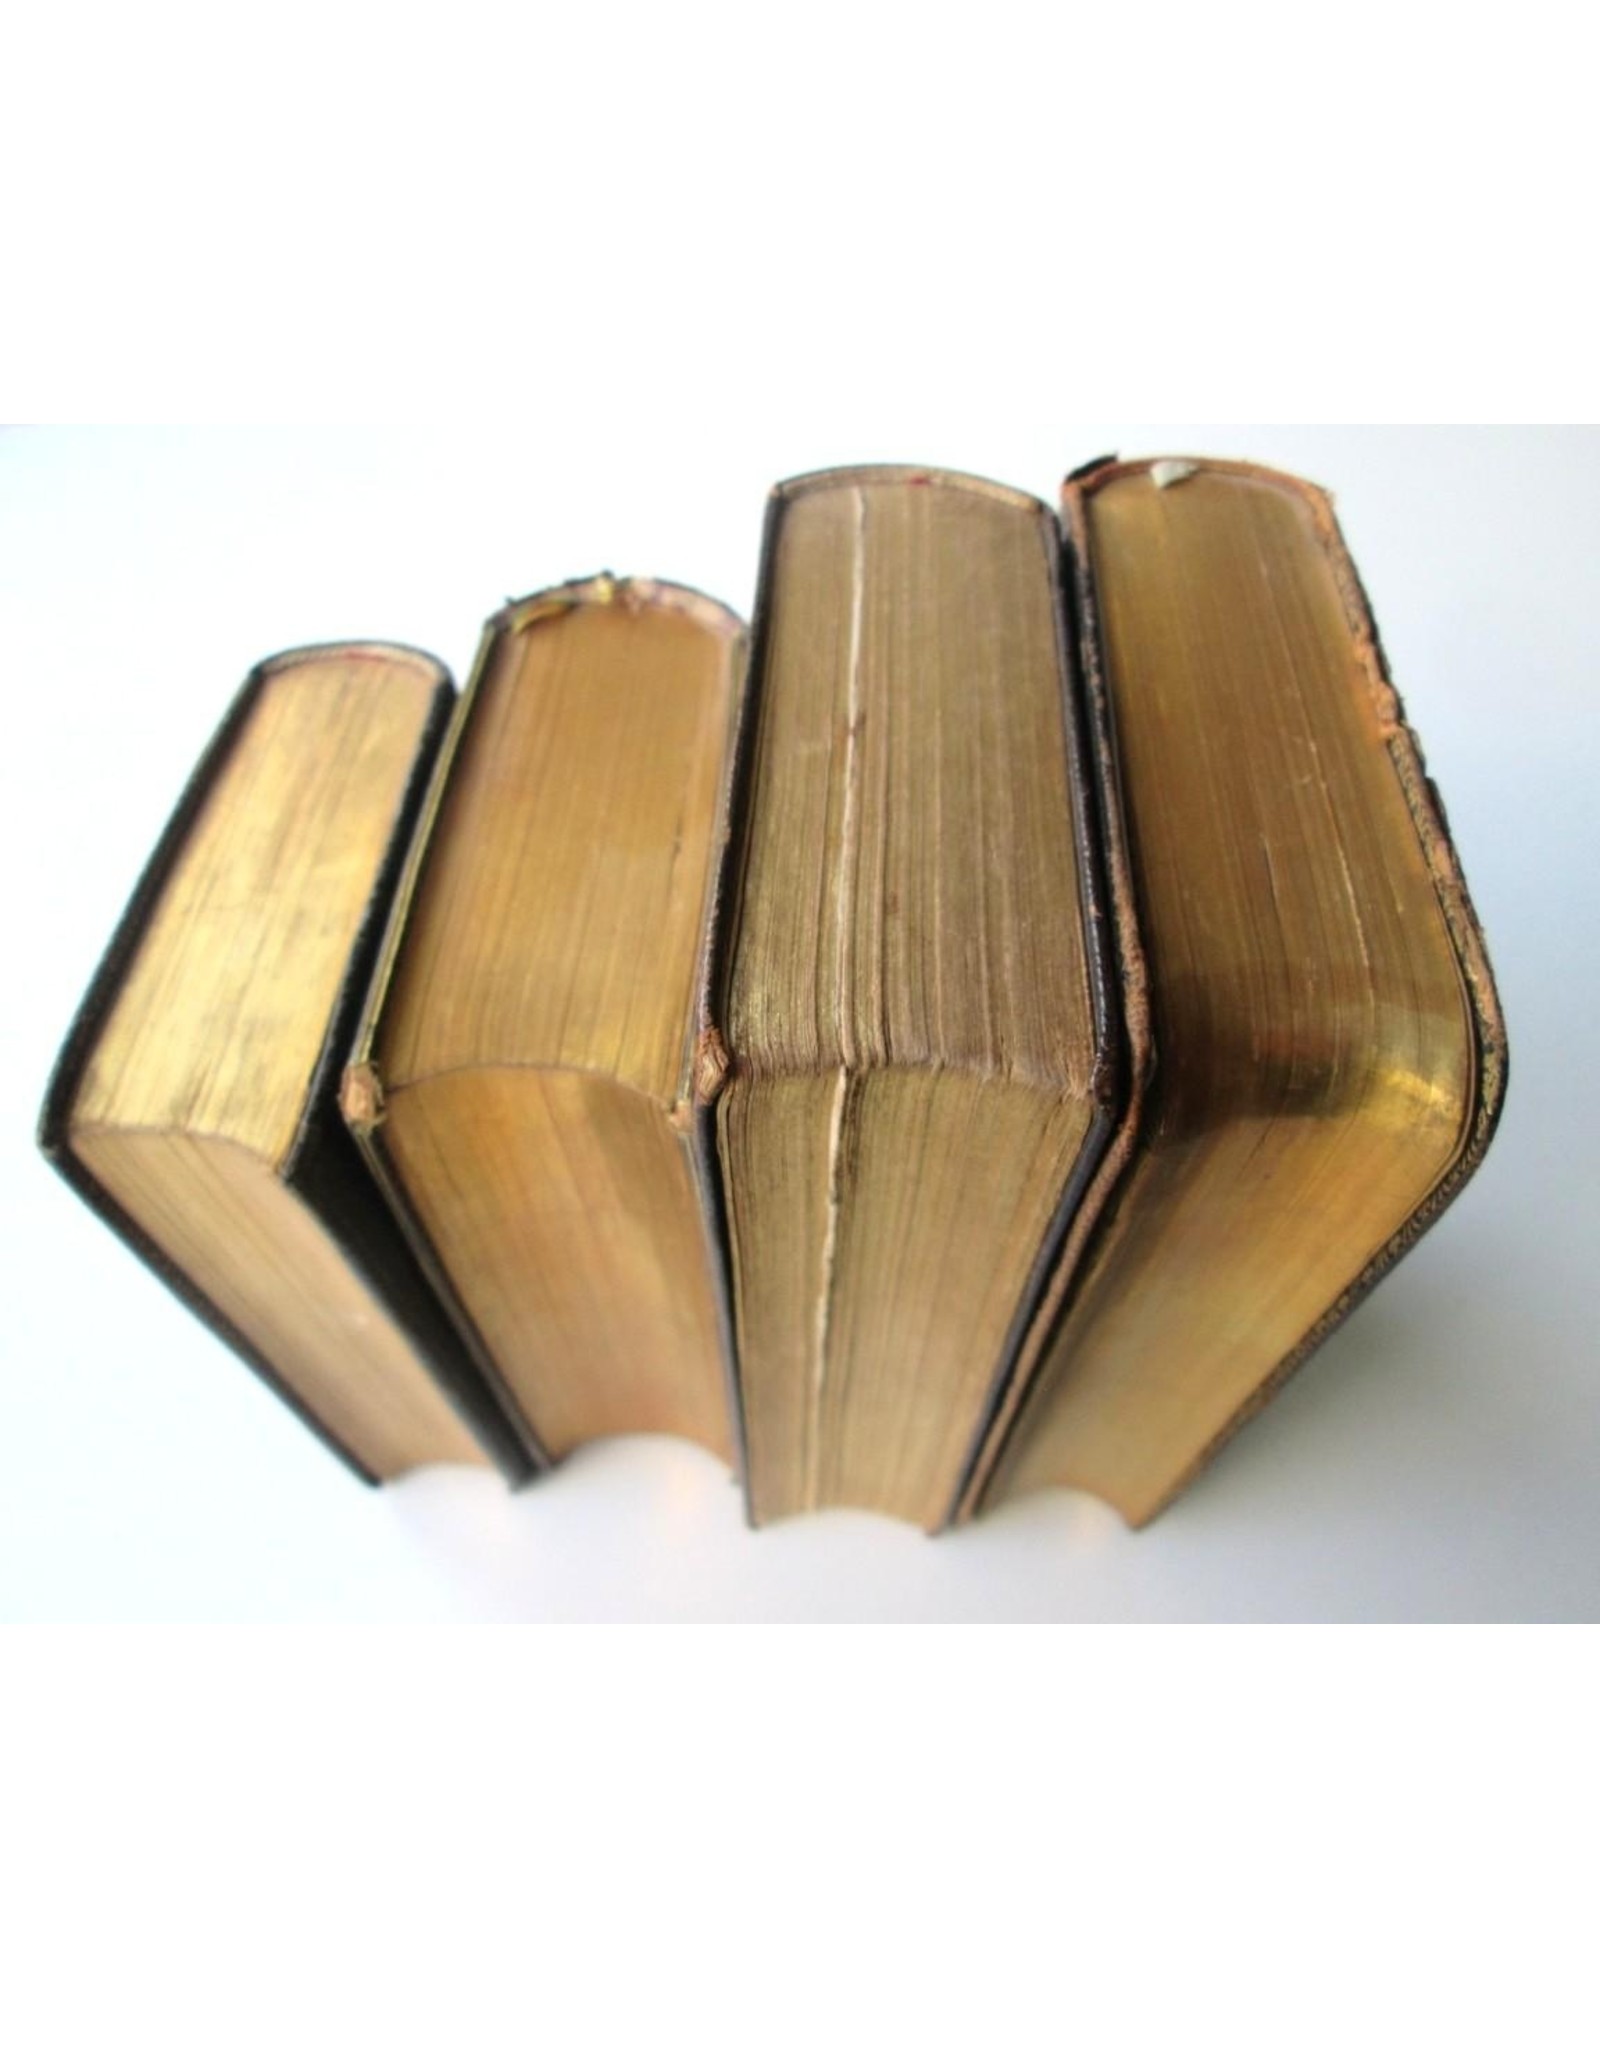 [Book bindings] Lot with 4 old French prayer books